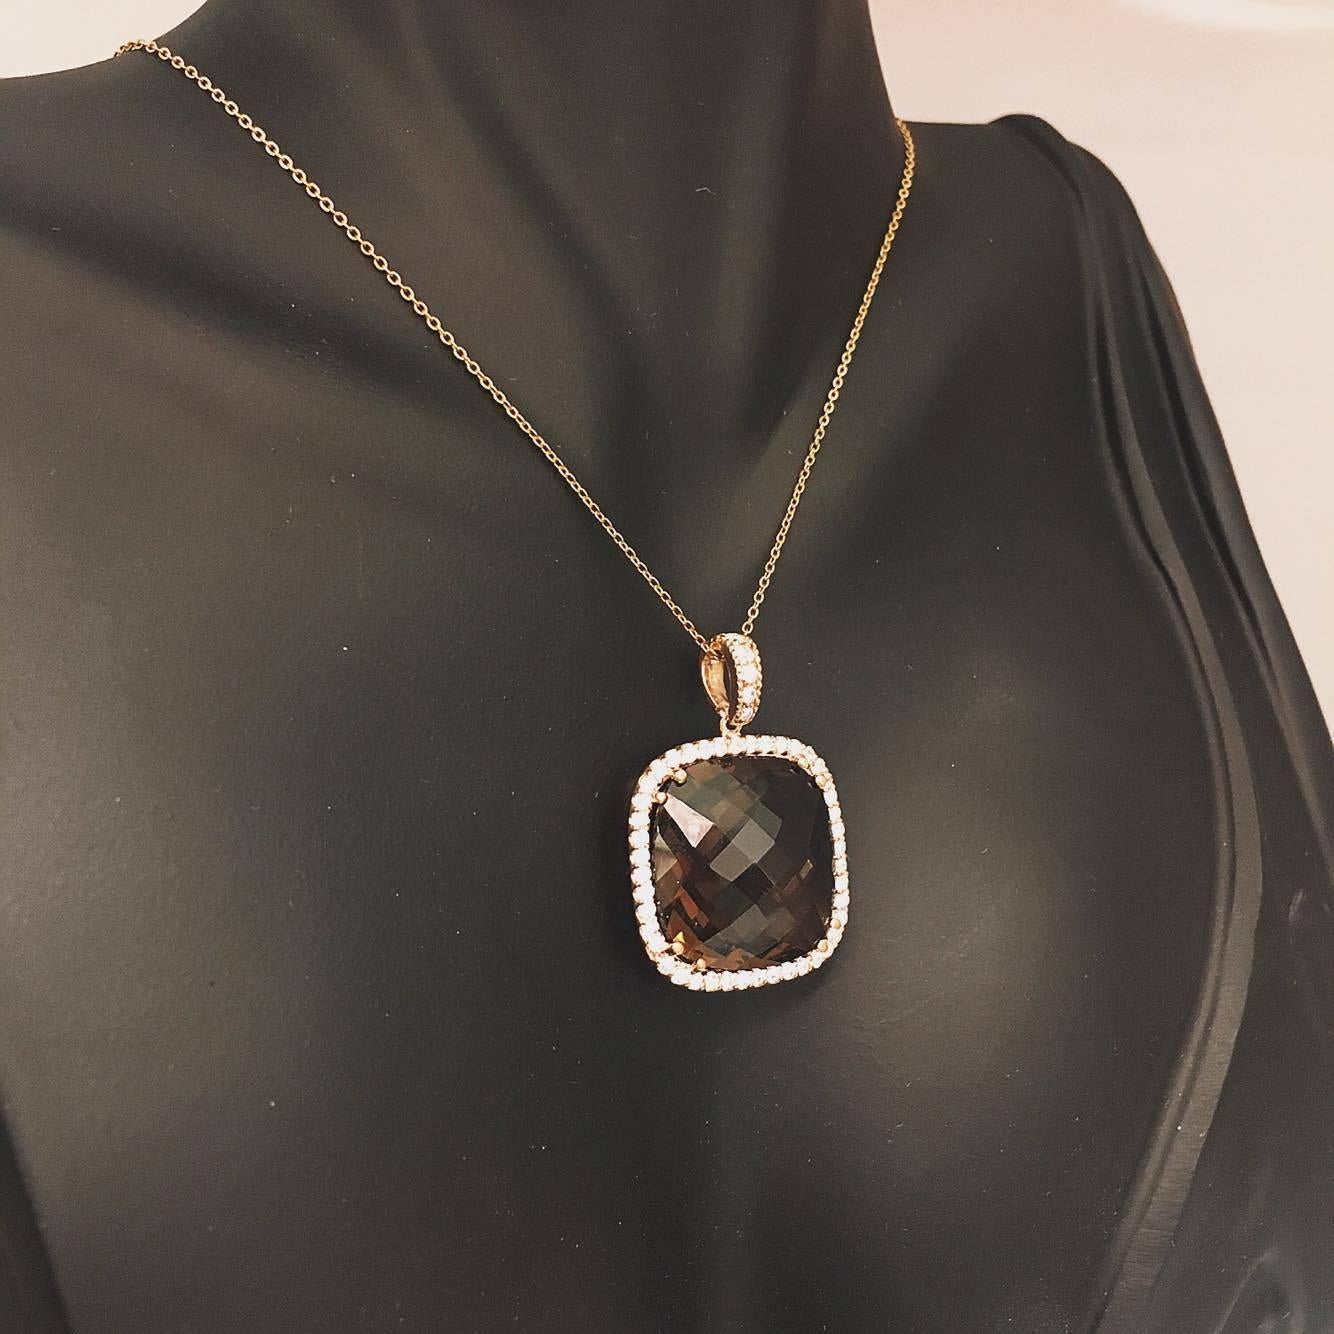 20.00ct Smokey Quartz Center 18x18mm cushion and approx. 0.8 carats total weight diamonds. (Standard length is 17 inch- 18 inch, however any length is avaliablet). Can be ordered in 14k or 18k white/yellow/rose gold as well.  

Color: F  Clarity: